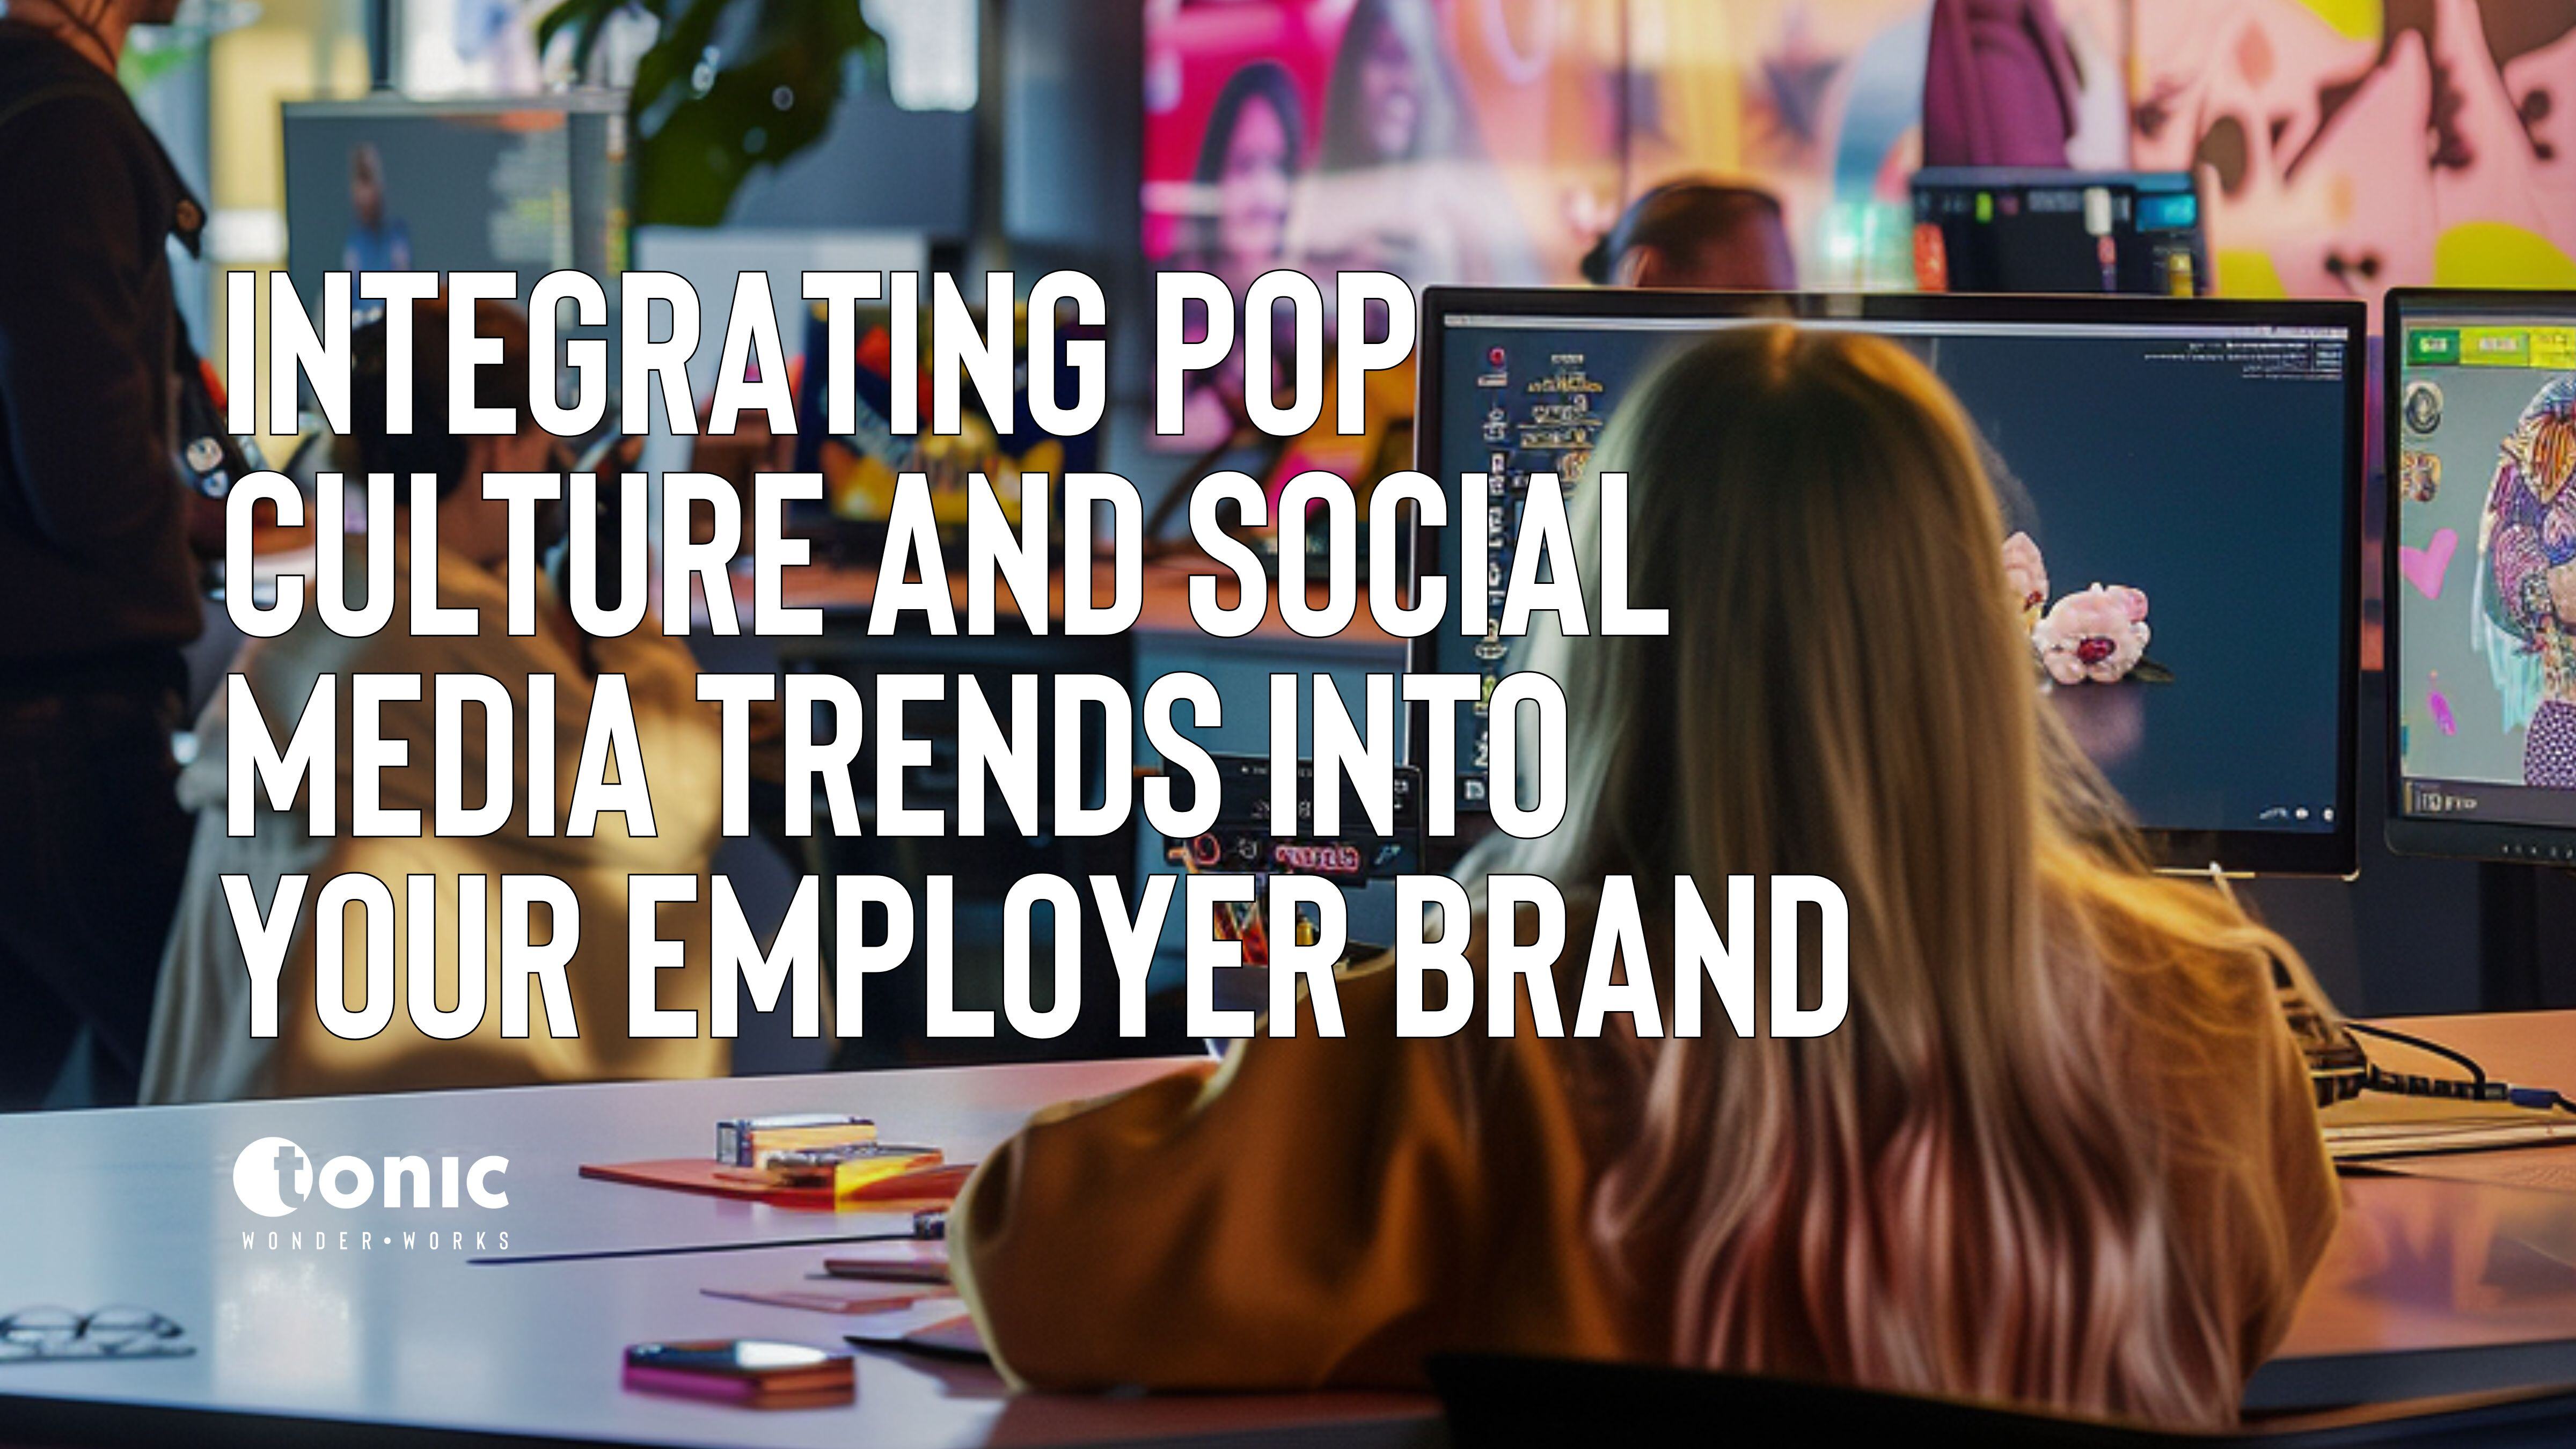 Trending Now: Integrating Pop Culture and Social Media into Your Employer Brand